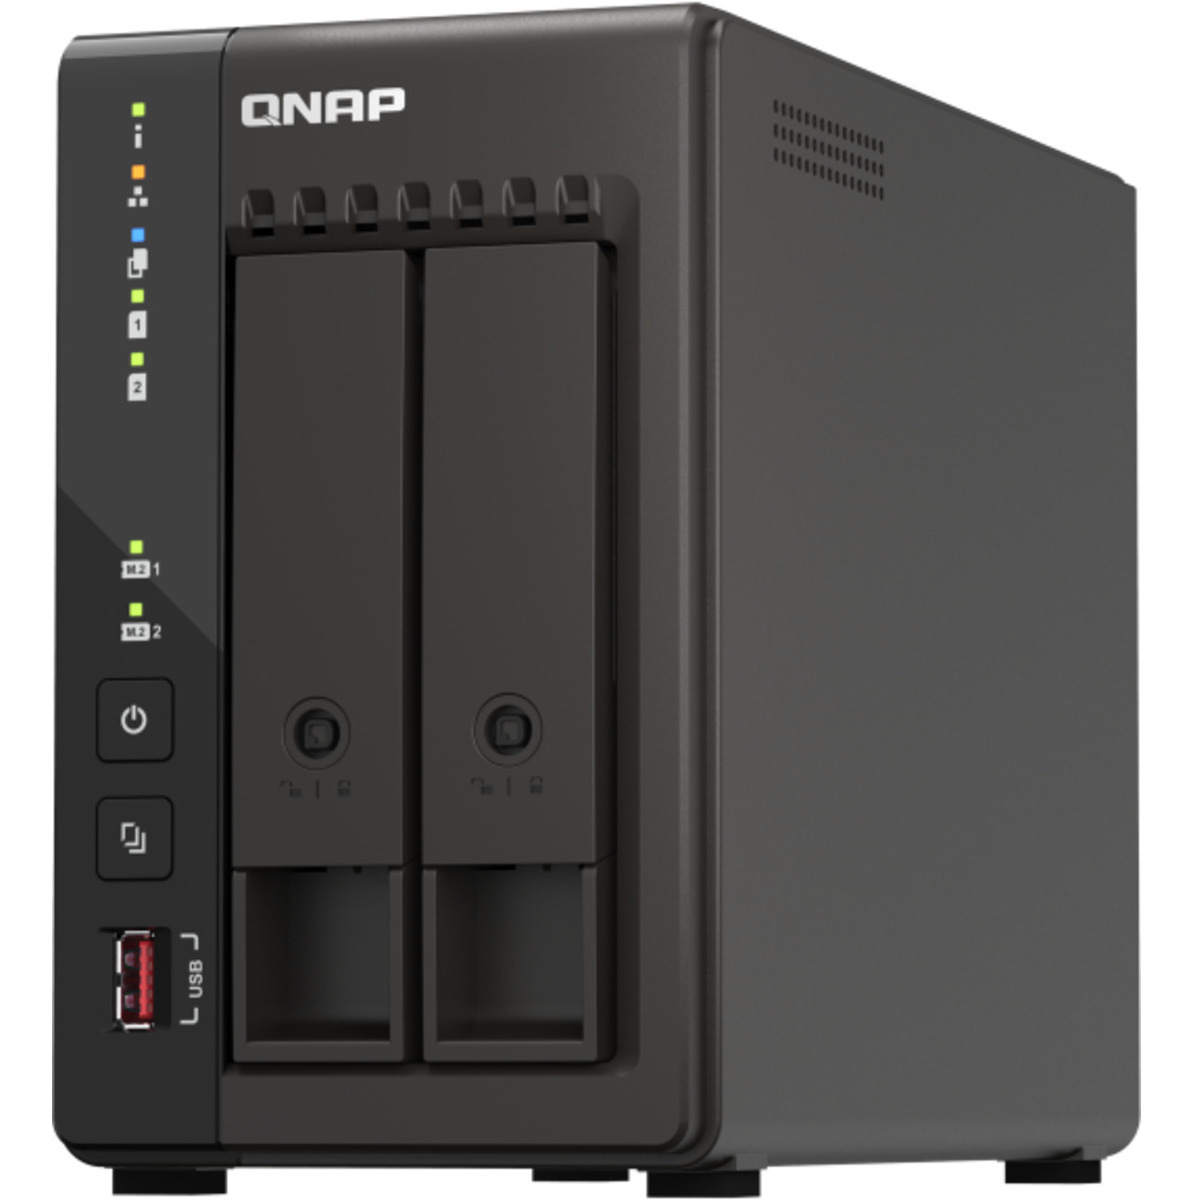 buy $1107 QNAP TS-253E 32tb Desktop NAS - Network Attached Storage Device 2x16000gb Seagate EXOS X18 ST16000NM000J 3.5 7200rpm SATA 6Gb/s HDD ENTERPRISE Class Drives Installed - Burn-In Tested - nas headquarters buy network attached storage server device das new raid-5 free shipping simply usa TS-253E